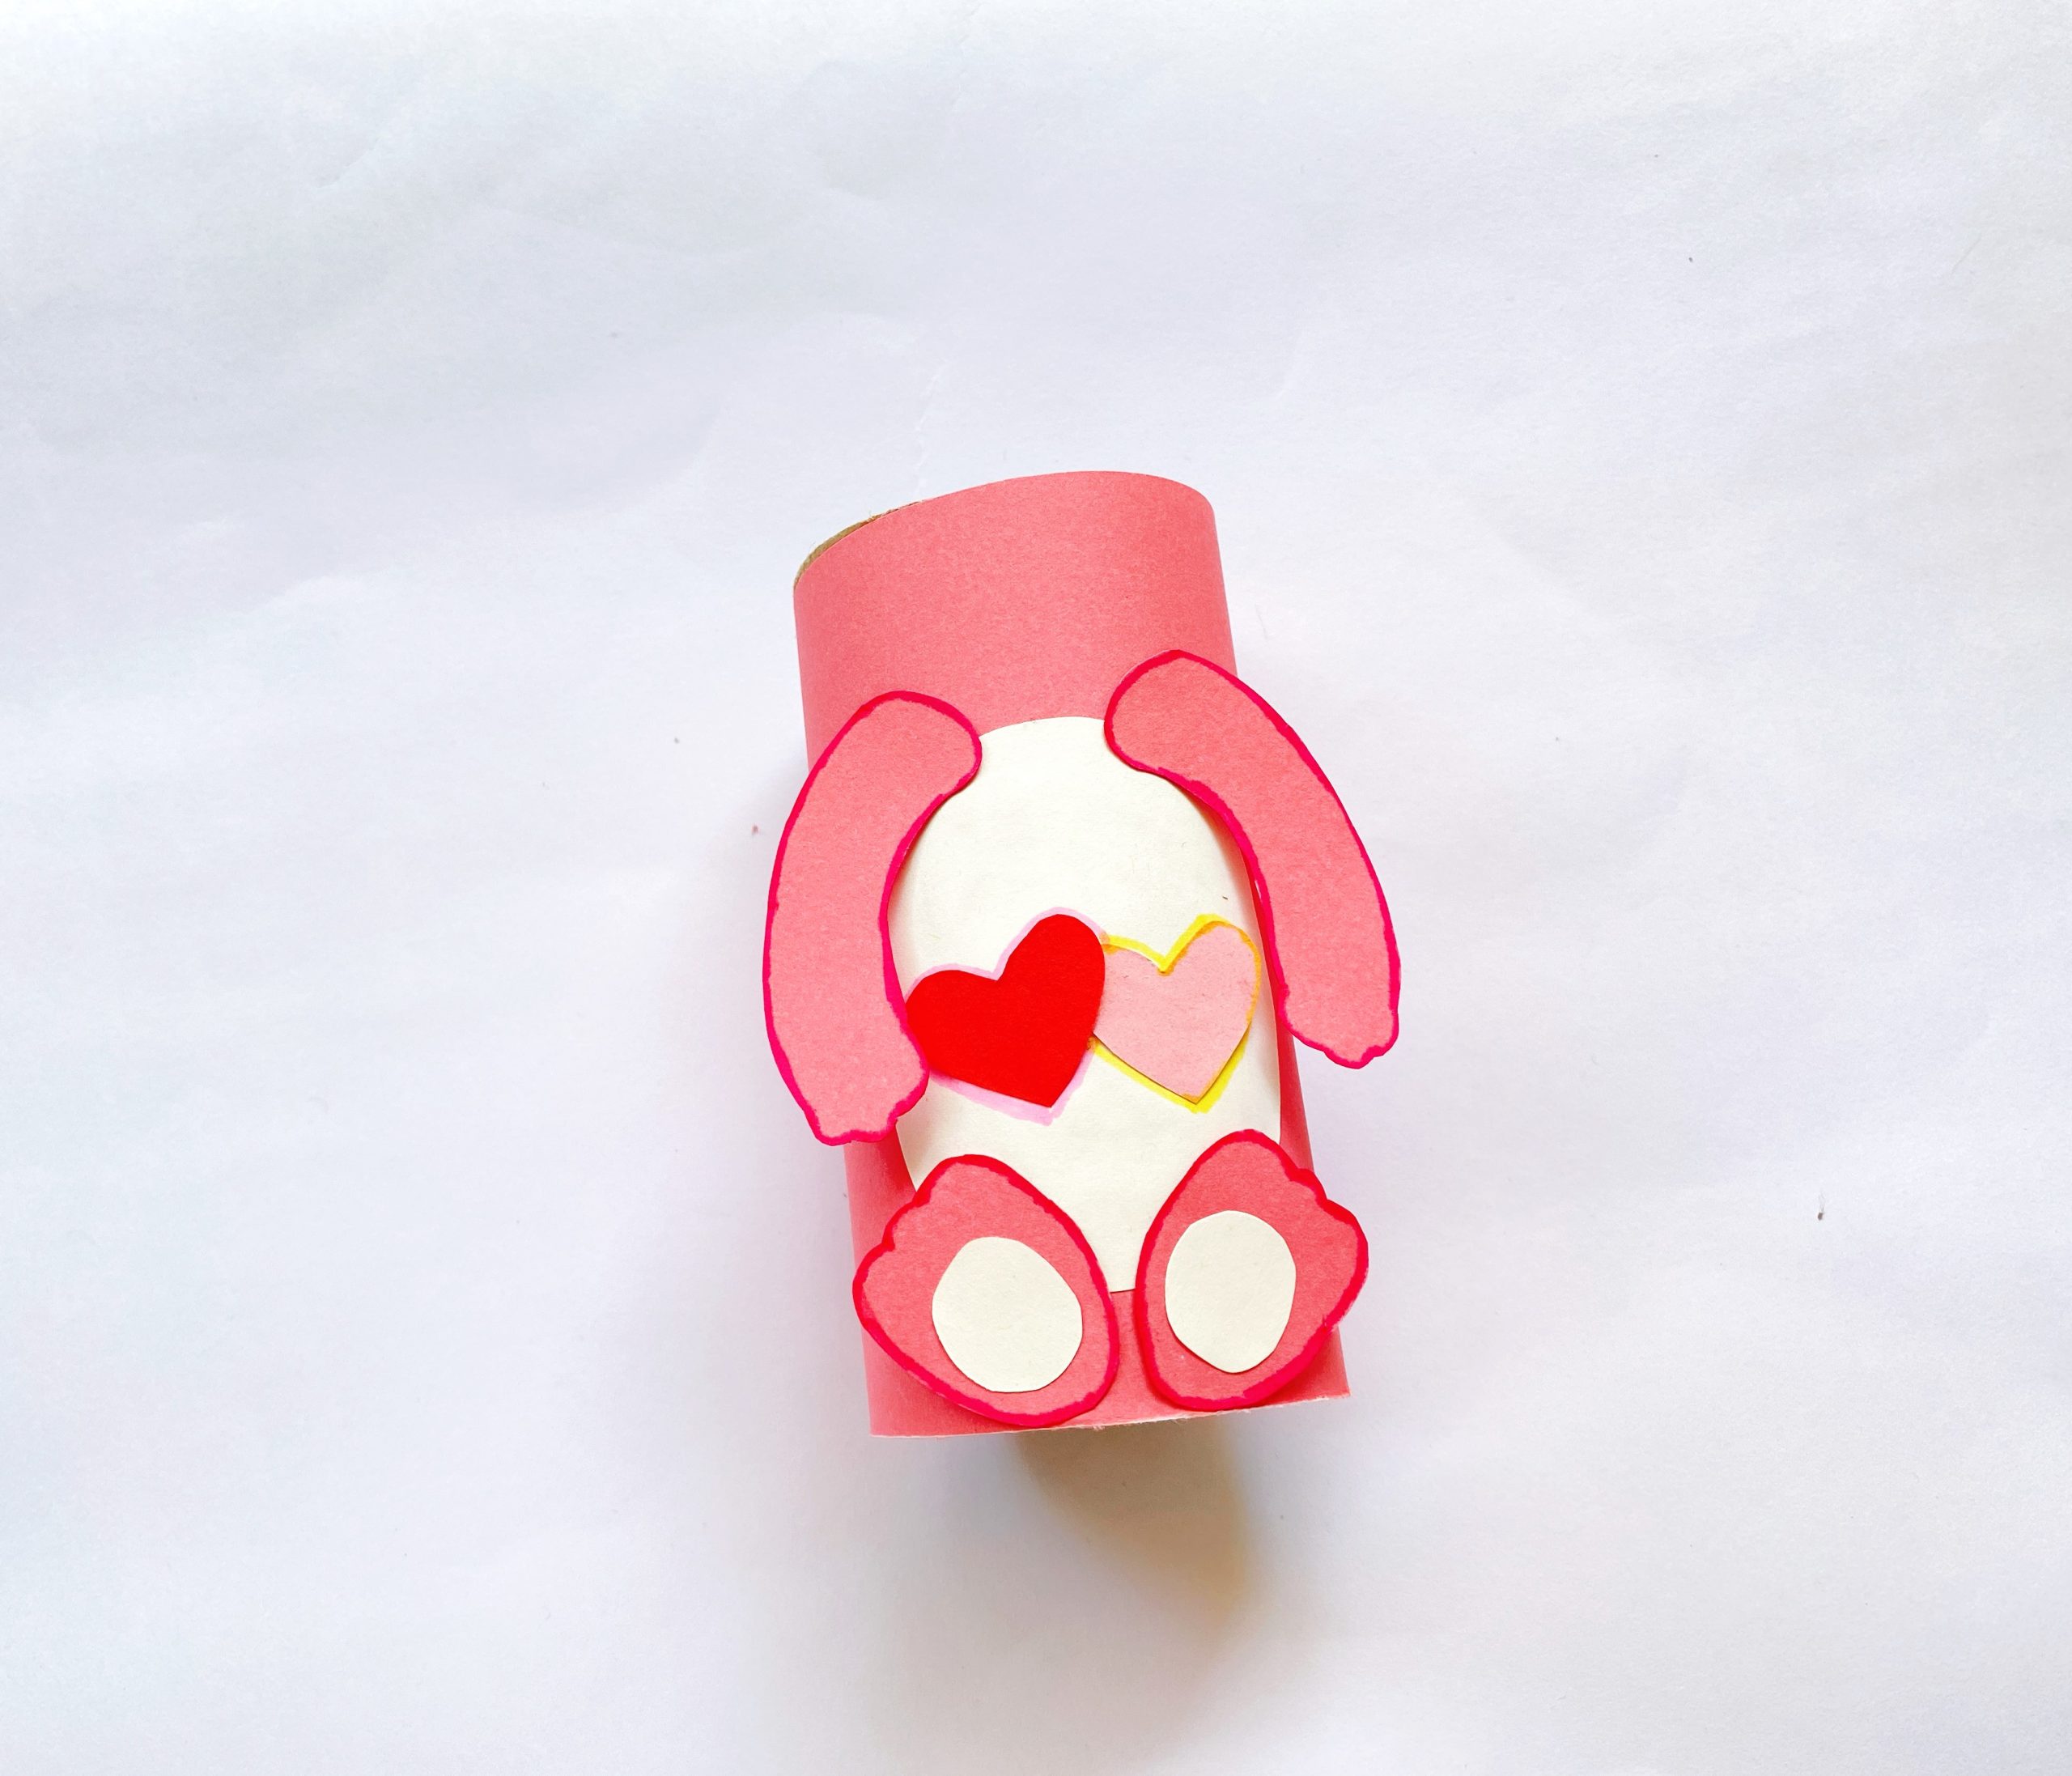 Love-a-Lot Toilet Paper Roll Craft Image